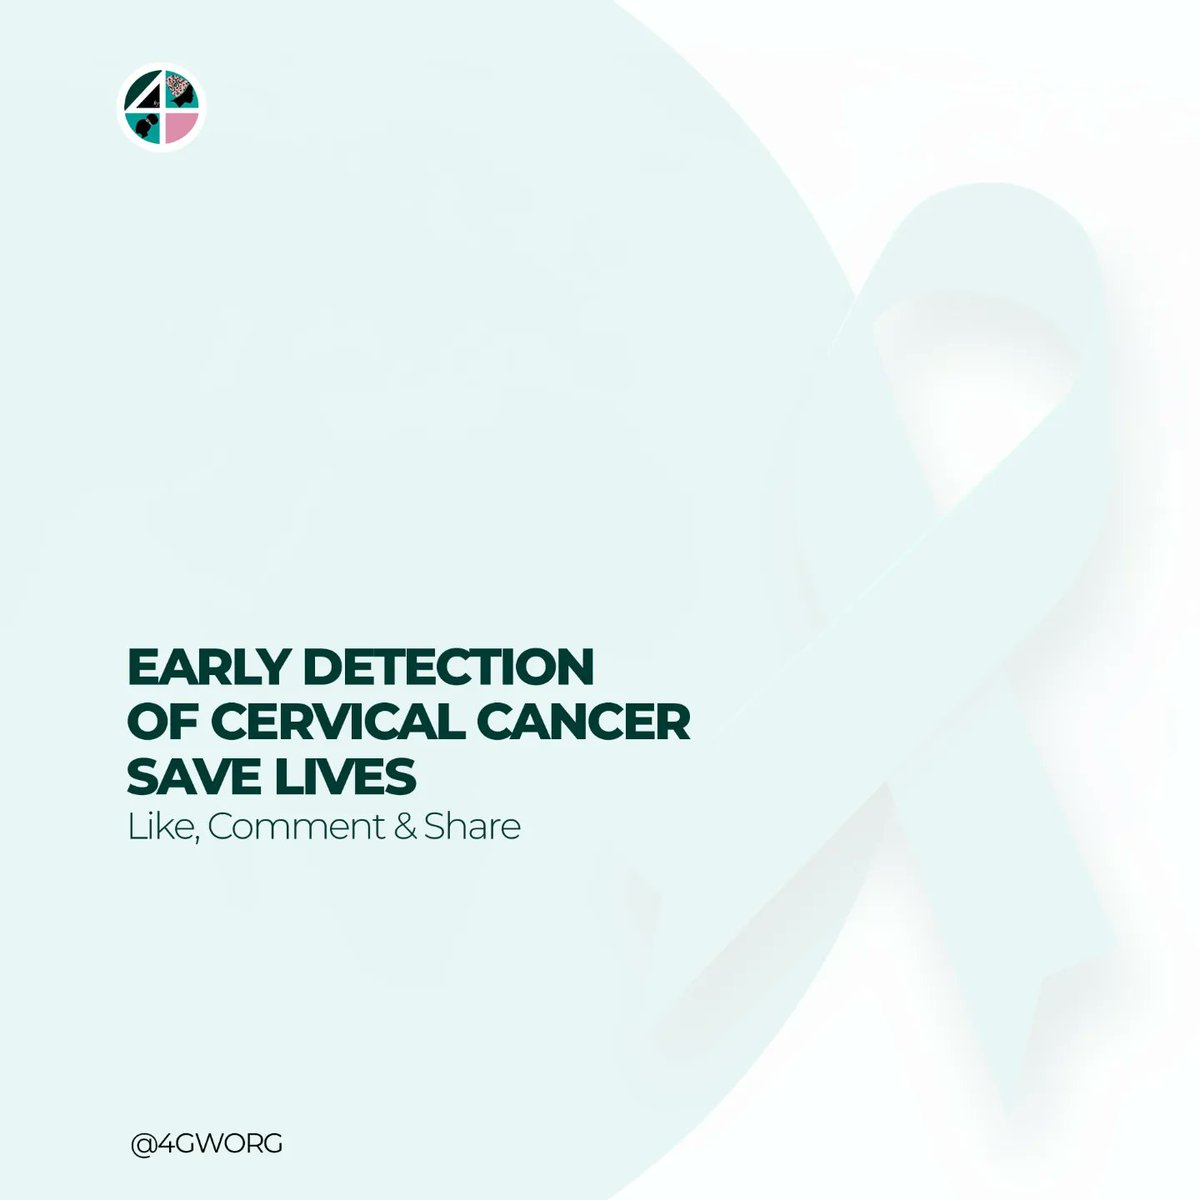 Researches have shown that most cervical cancer cases in Nigeria are diagnosed at an advanced stage, usually stage III. Check the images to learn more about the stages of cervical cancer. Take charge of your health and prioritize cervical cancer screening. #FridayFact #health